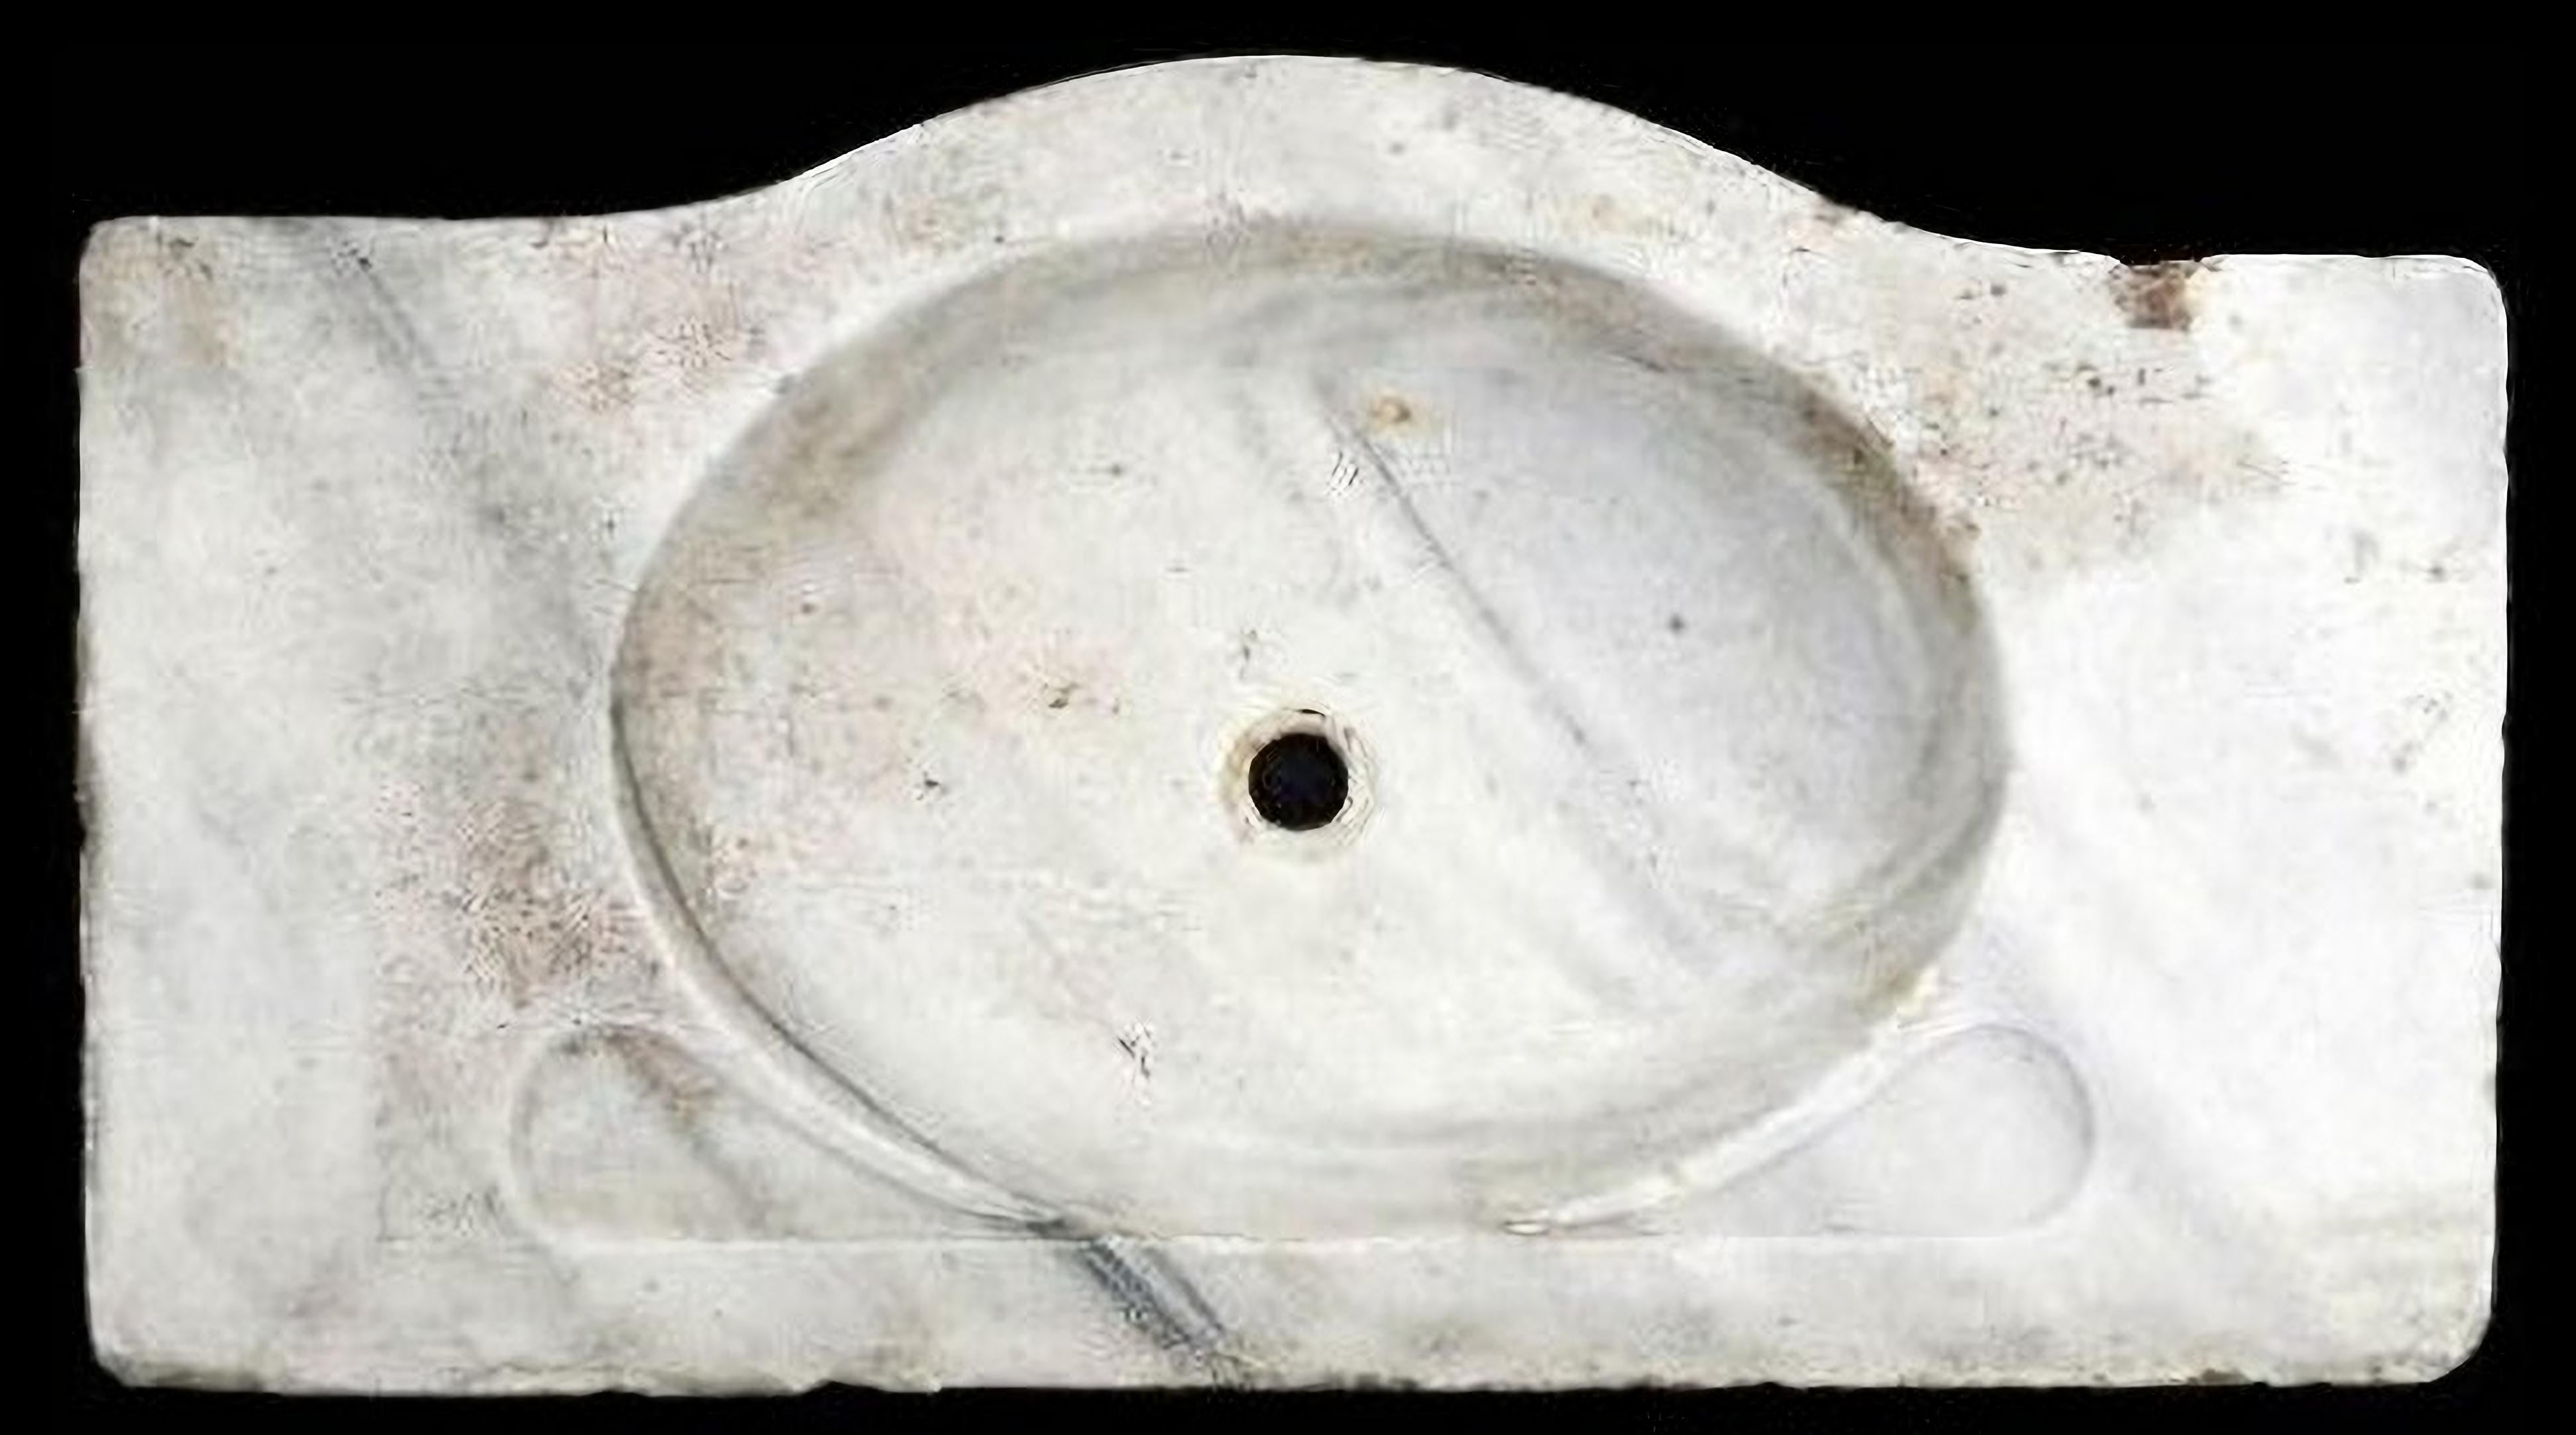 ANTIQUE ORIGINAL MARBLE SINK began 20th Century

Original antique white marble sink.
WIDTH 39 cm
LENGTH 70 cm
INTERNAL DEPTH OF THE BASIN 8 cm
THICKNESS 11 cm
OVAL HOLE DIMENSIONS 40 X 29 cm
Ancient MANUFACTURING
MATERIAL White Carrara marble